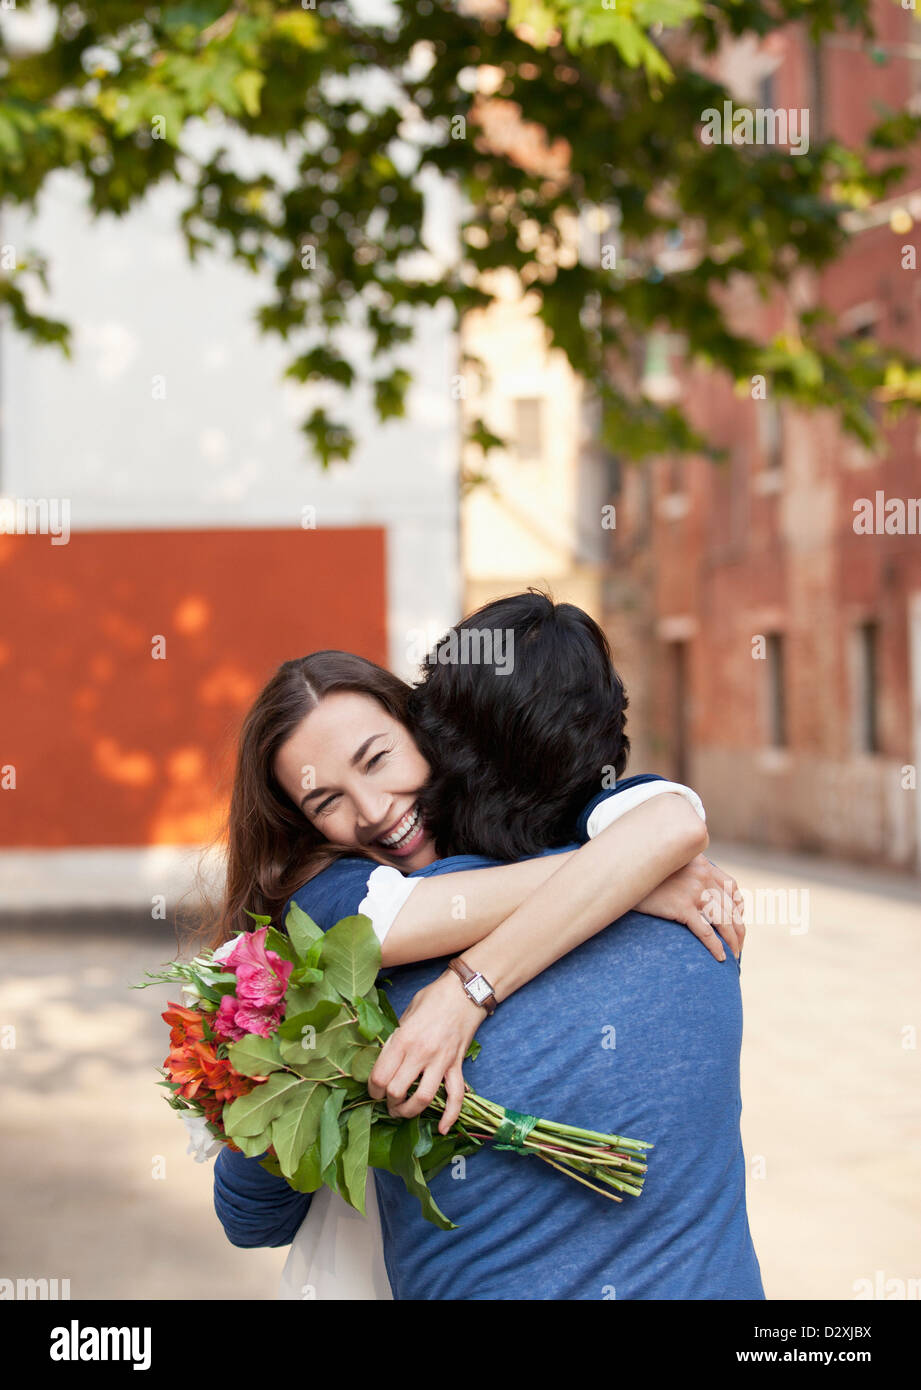 Smiling woman with flowers hugging man Stock Photo